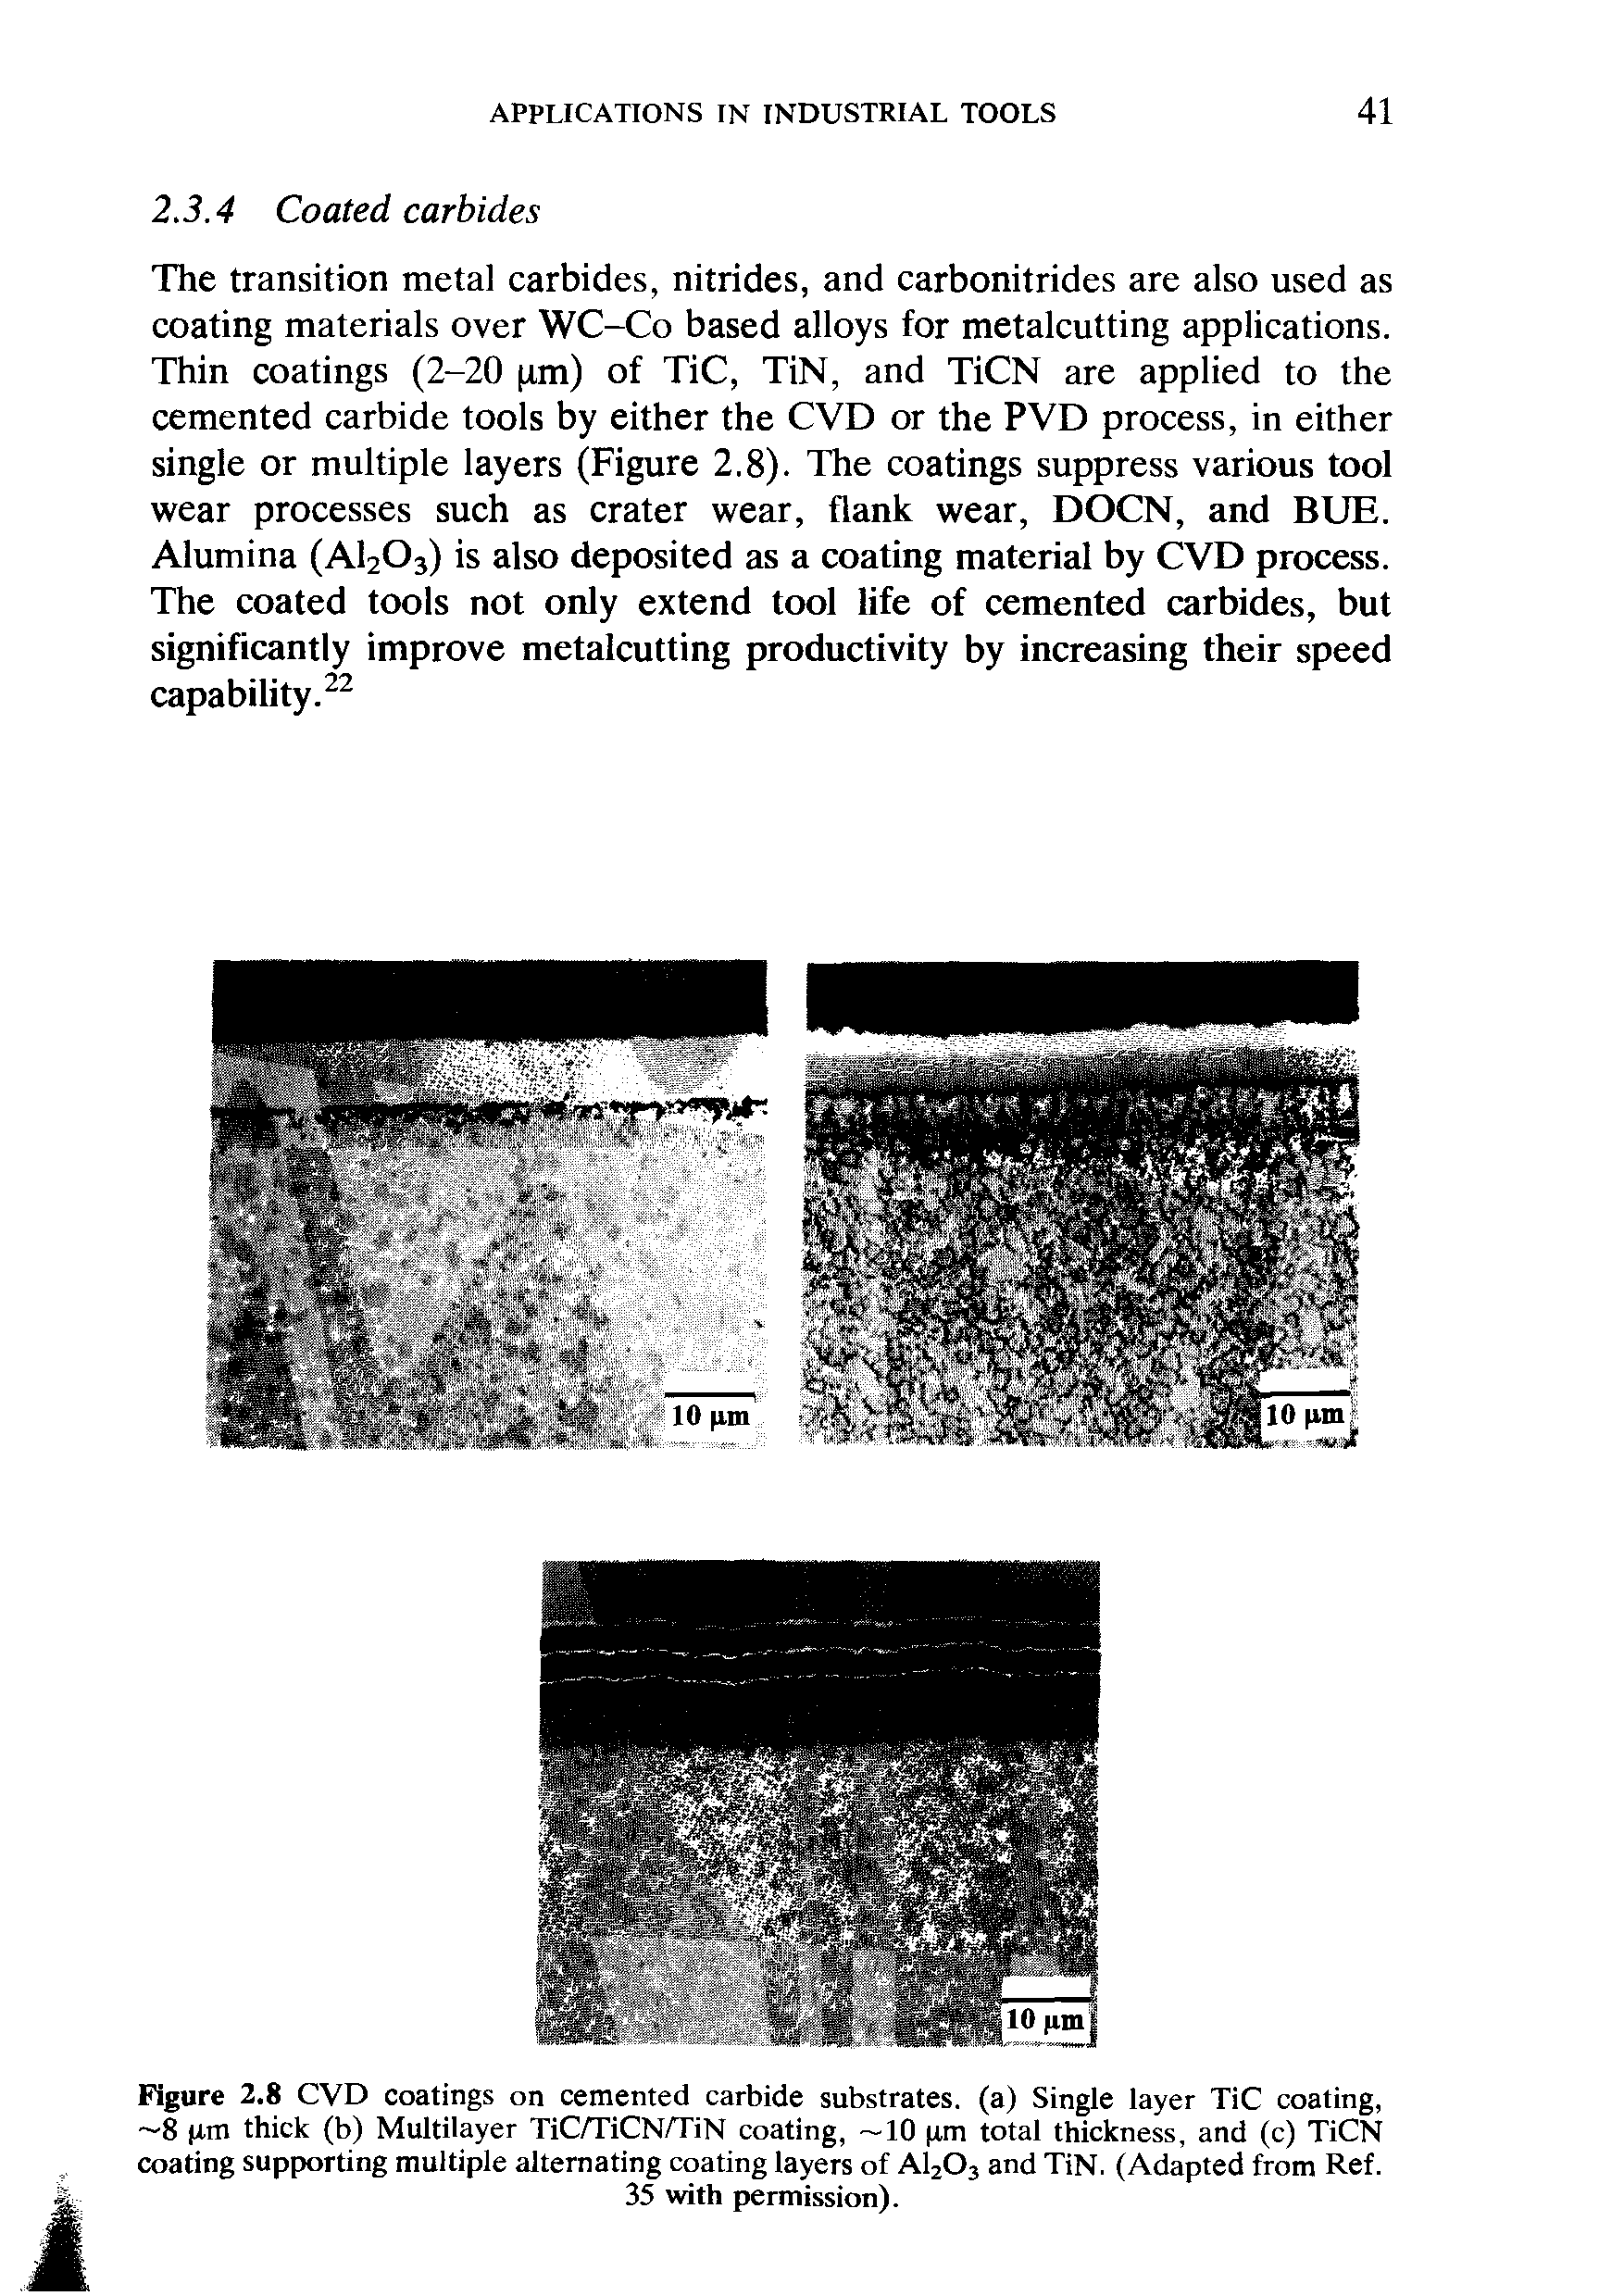 Figure 2.8 CVD coatings on cemented carbide substrates, (a) Single layer TiC coating, 8 pm thick (b) Multilayer TiC/TiCN/TiN coating, —10 xm total thickness, and (c) TiCN coating supporting multiple alternating coating layers of A1203 and TiN. (Adapted from Ref.